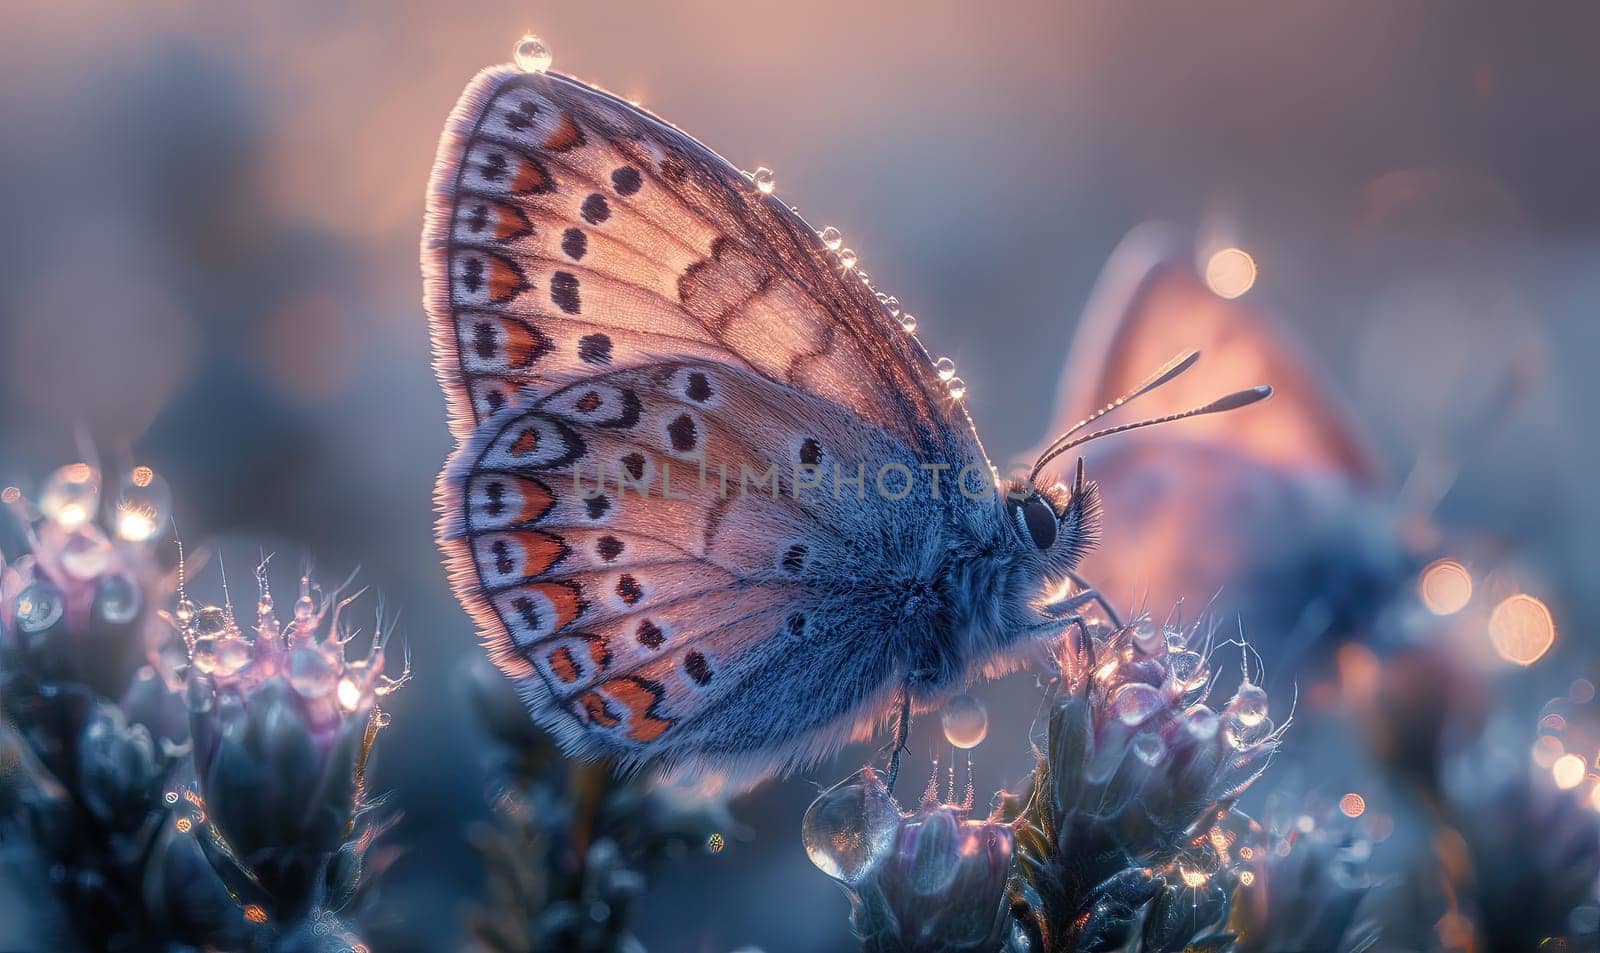 Colorful butterfly on a blurred natural background. Selective soft focus